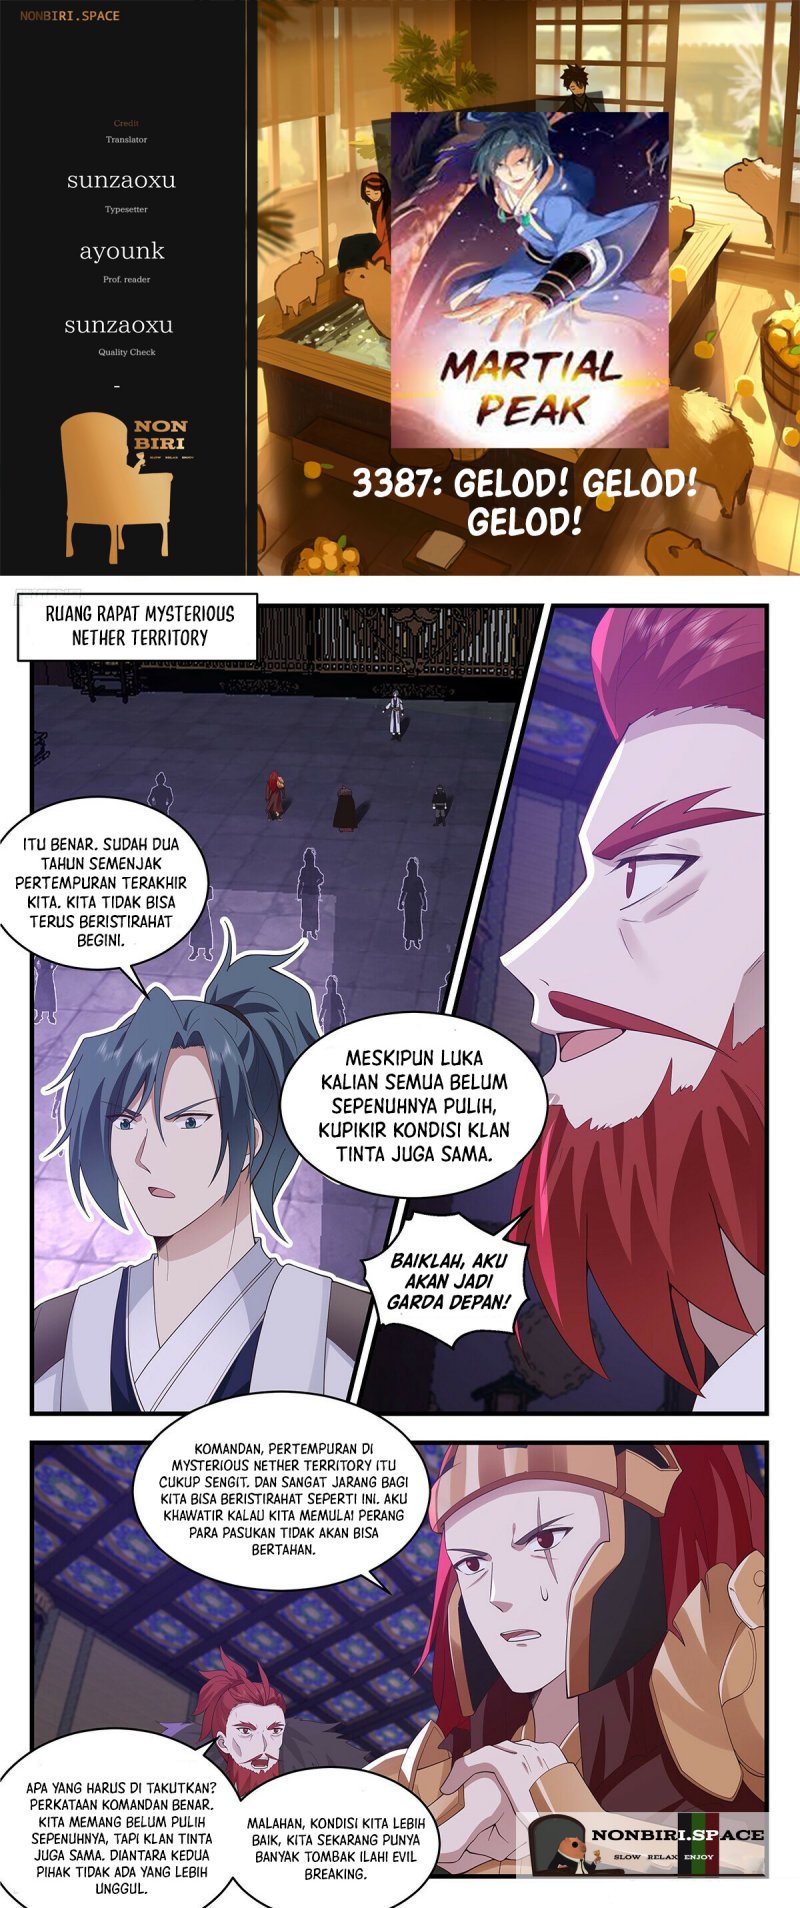 Martial Peak: Chapter 3387 - Page 1